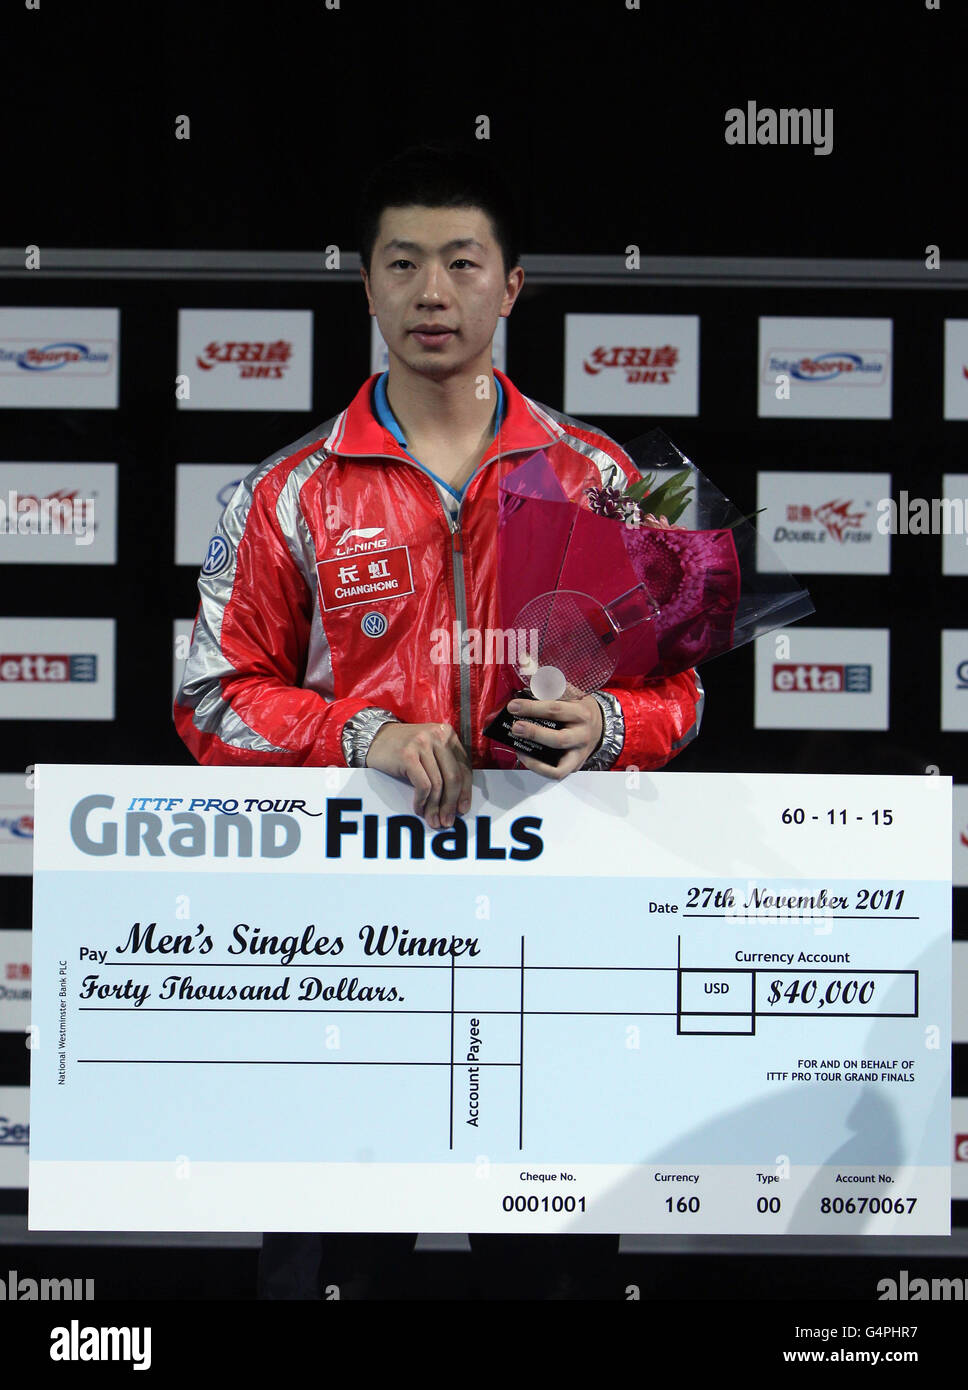 Olympics - Table Tennis - London 2012 Test Event - ITTF Pro Tour Grand Finals - Day Four - Excel Arena. China's Ma Long celebrates victory and receives a cheque for winning the final of the ITTF Pro Tour Grand Finals at the Excel Arena, London. Stock Photo